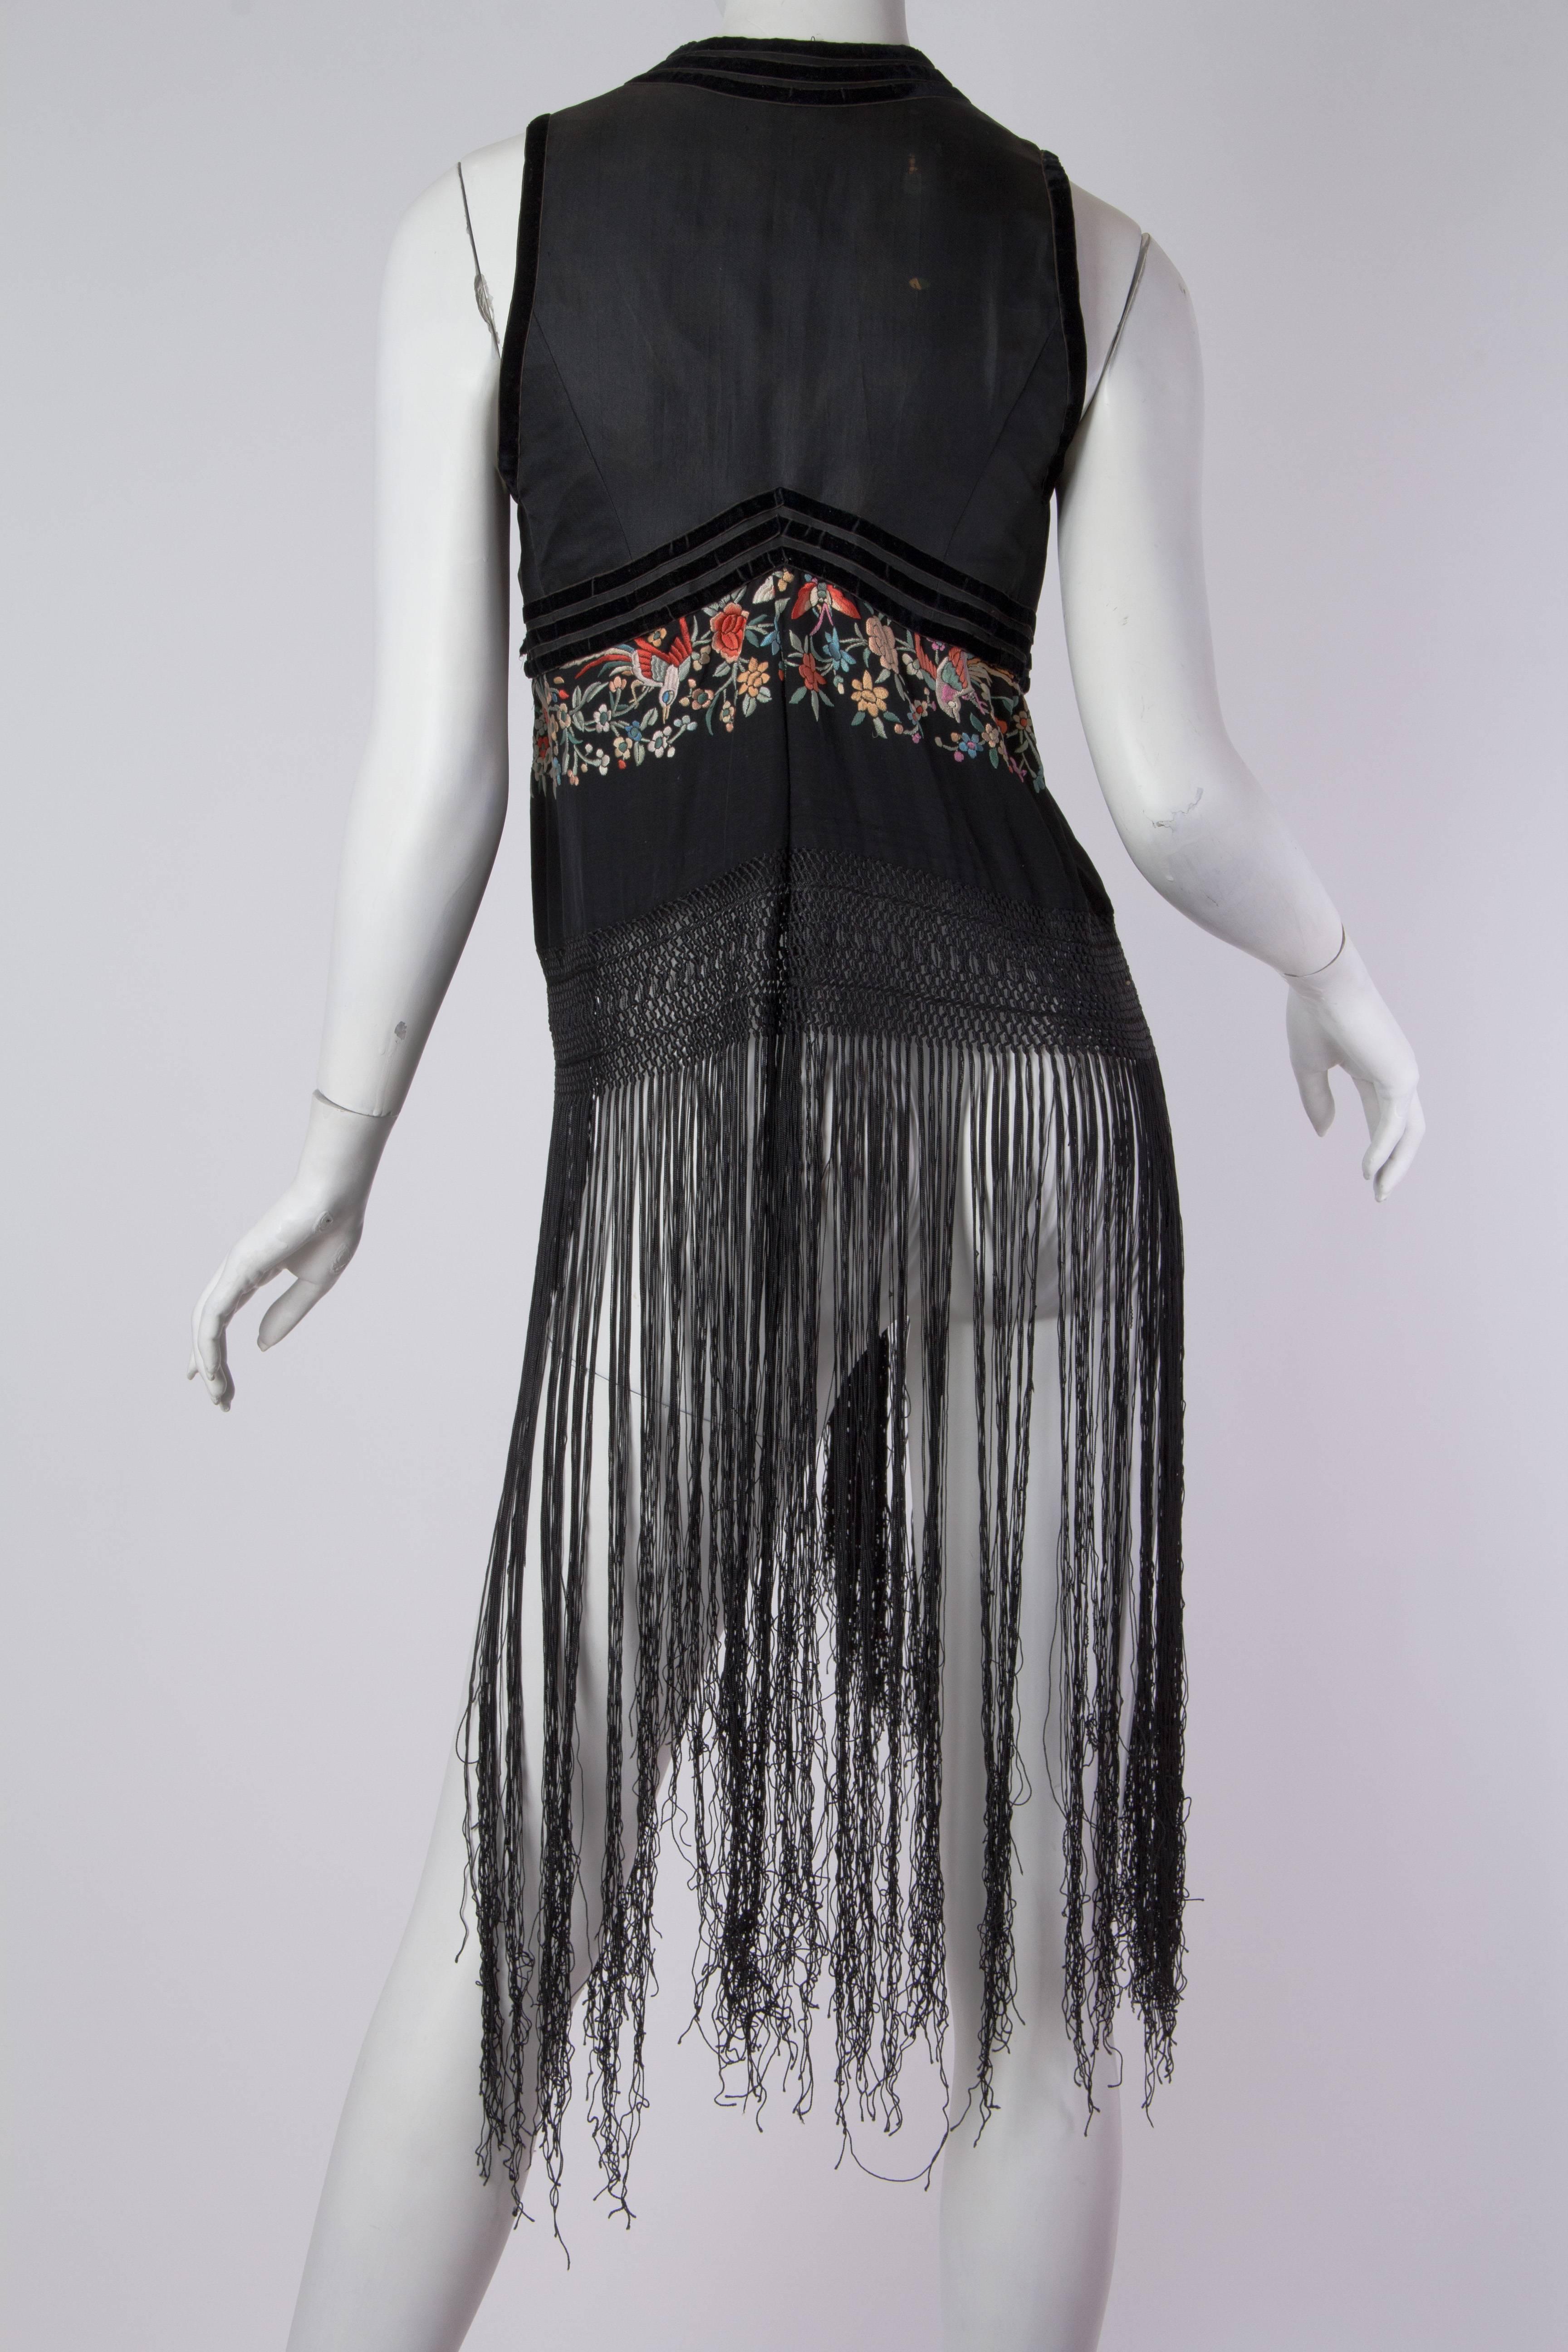 MORPHEW COLLECTION Black Silk Antique Vest With Chinese Embroidery & Hand-Knott For Sale 1